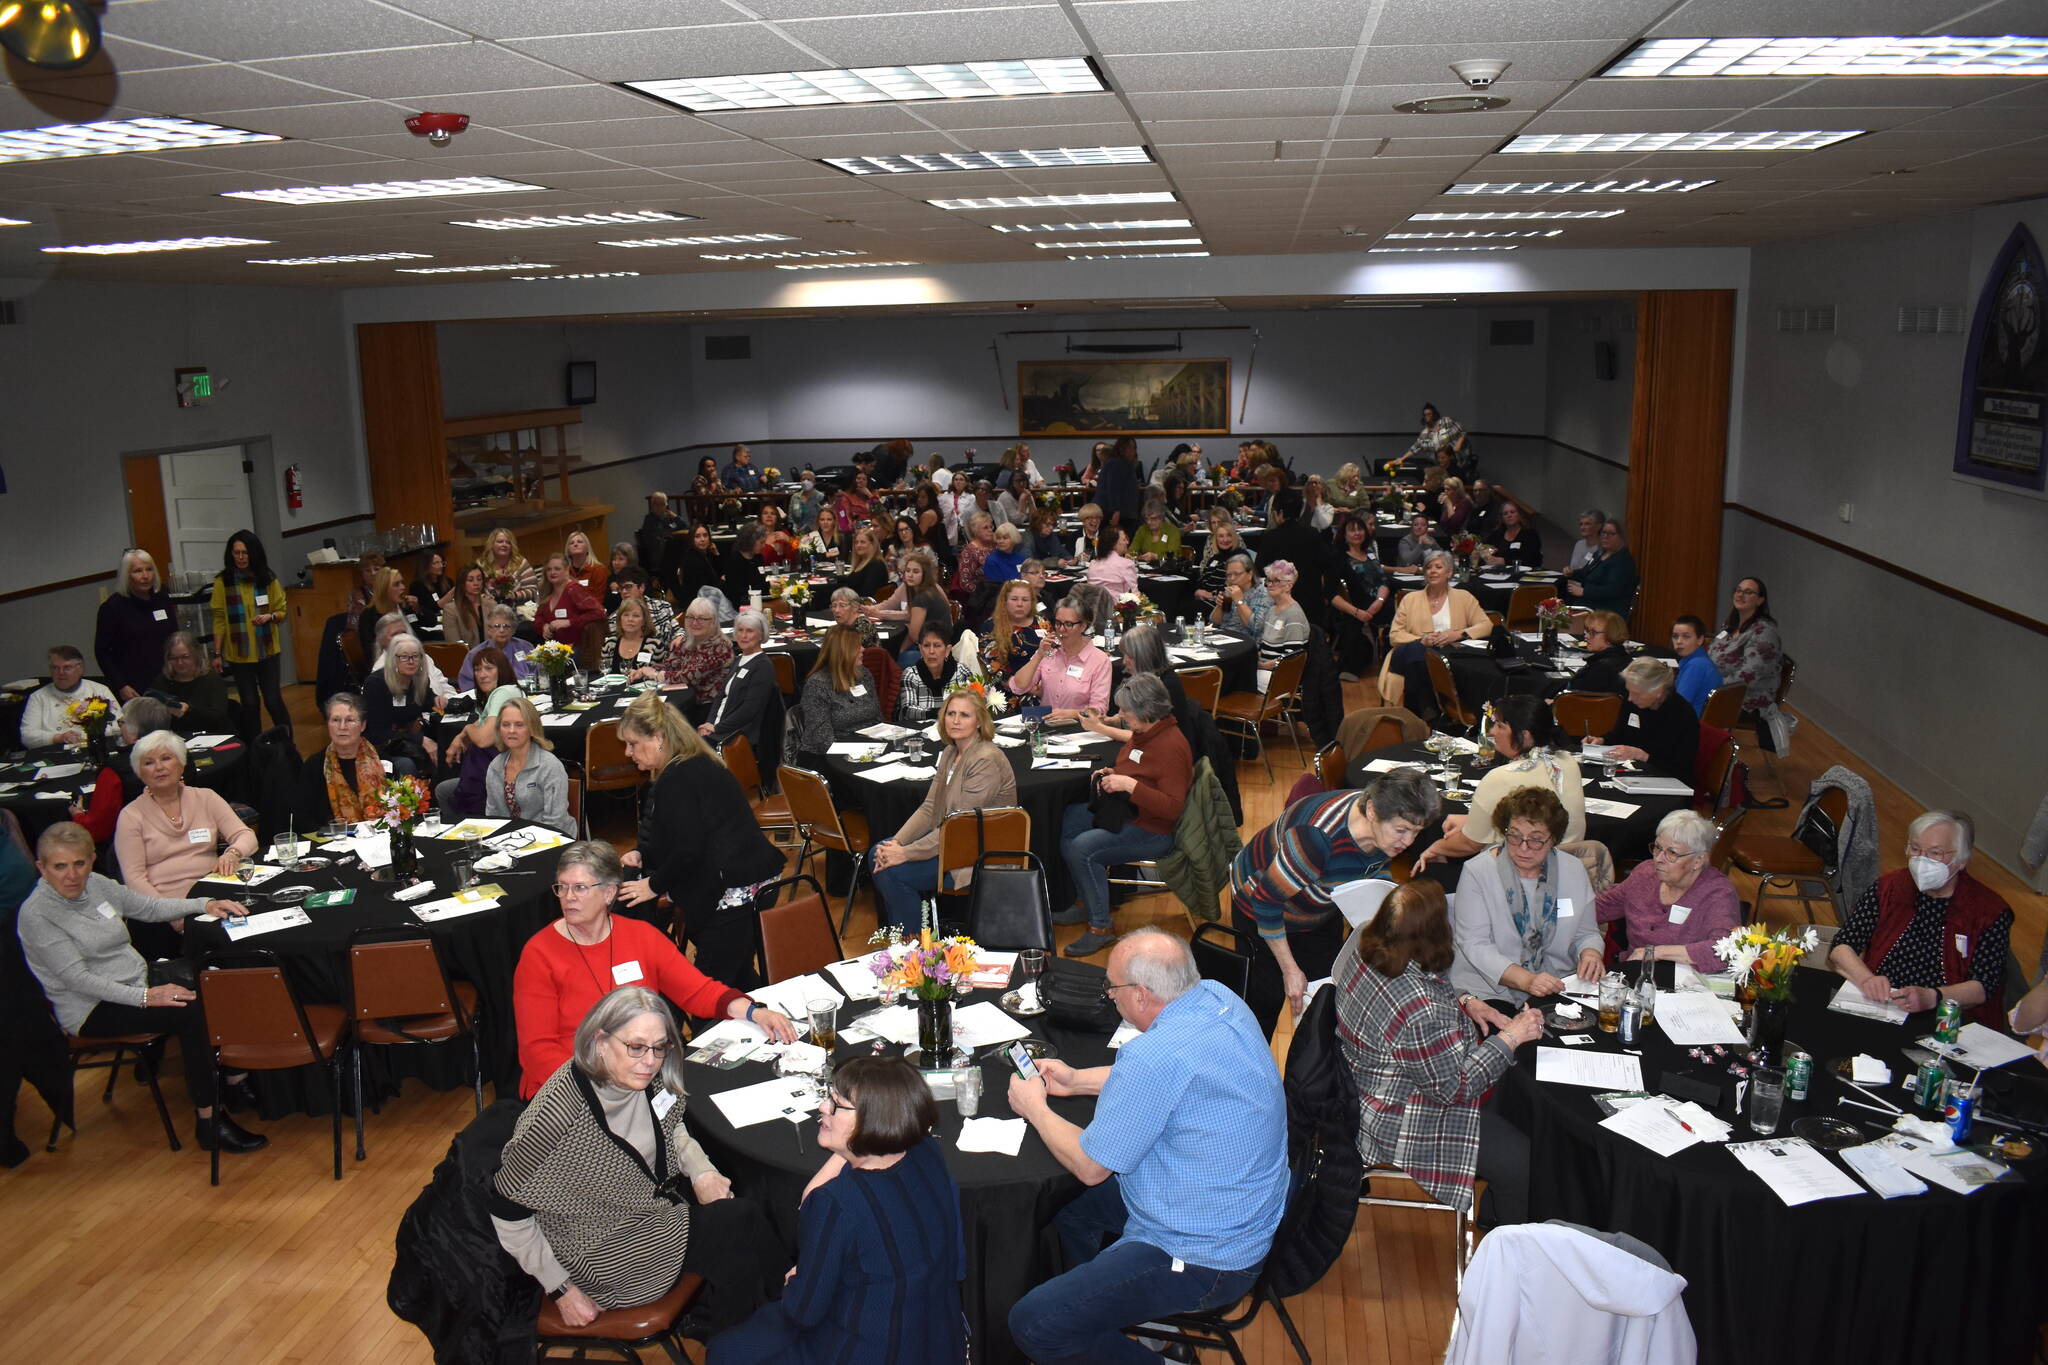 Matthew N. Wells / The Daily World
In this photo from March 2023, when the group 100+ Harbor Women Who Care raised $16,285 for North Beach Senior Center and Food Bank (NBSC,) the room was nearly filled to the brim. Most of the chairs, even at the back of the room were spoken for. An estimated 140 women showed up then. The hope is as many or more attend on Tuesday night for the 6 p.m. event at Hoquiam Elks Lodge, 1082 — 624 K St.